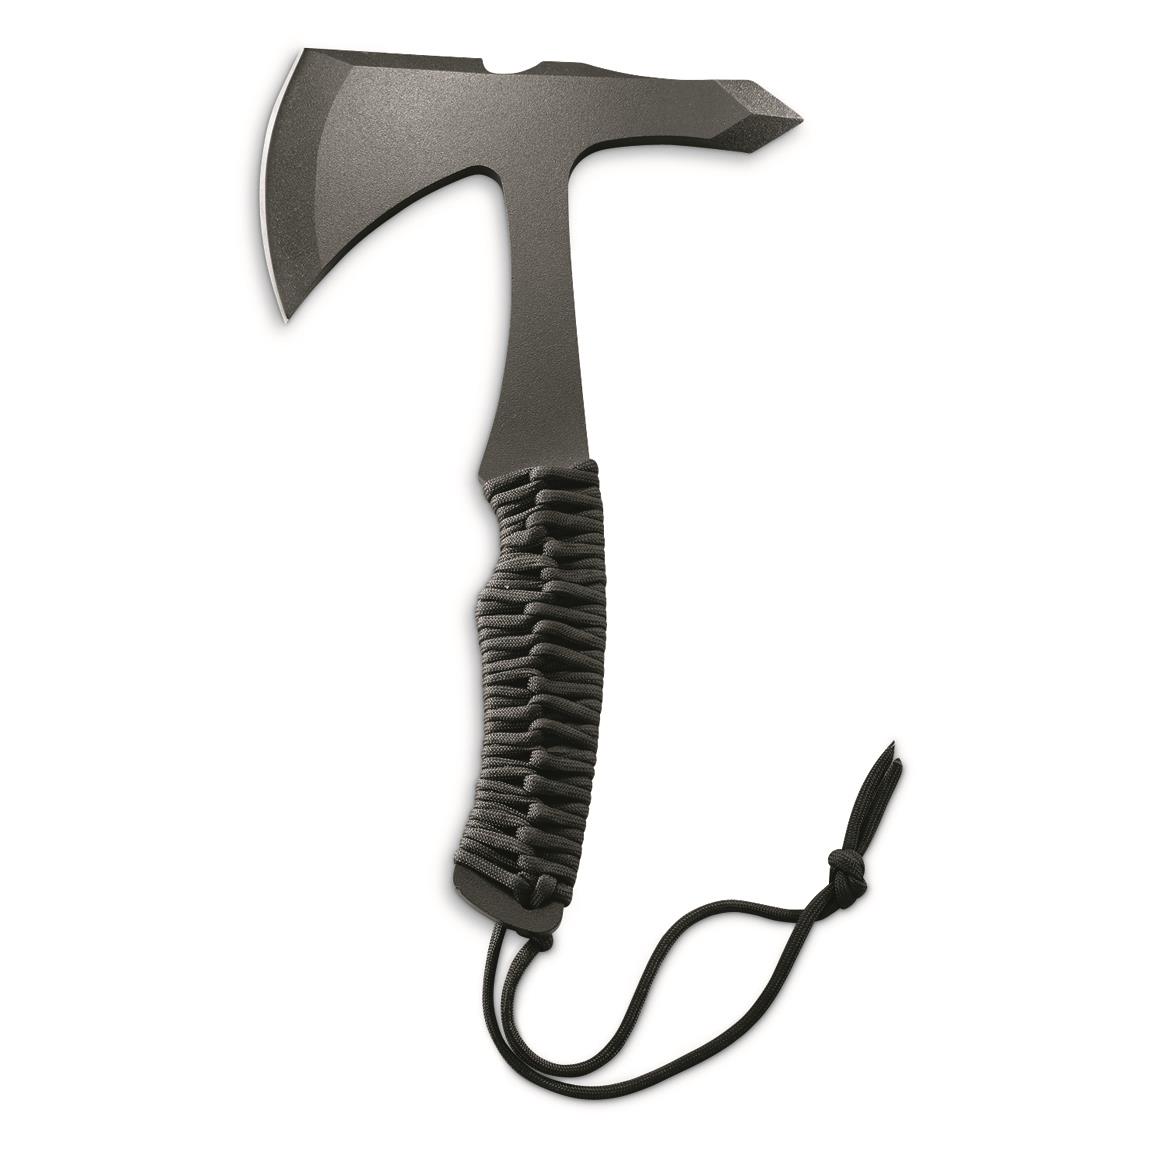 Patriot USA Made 1095 Steel Tactical Throwing Axe